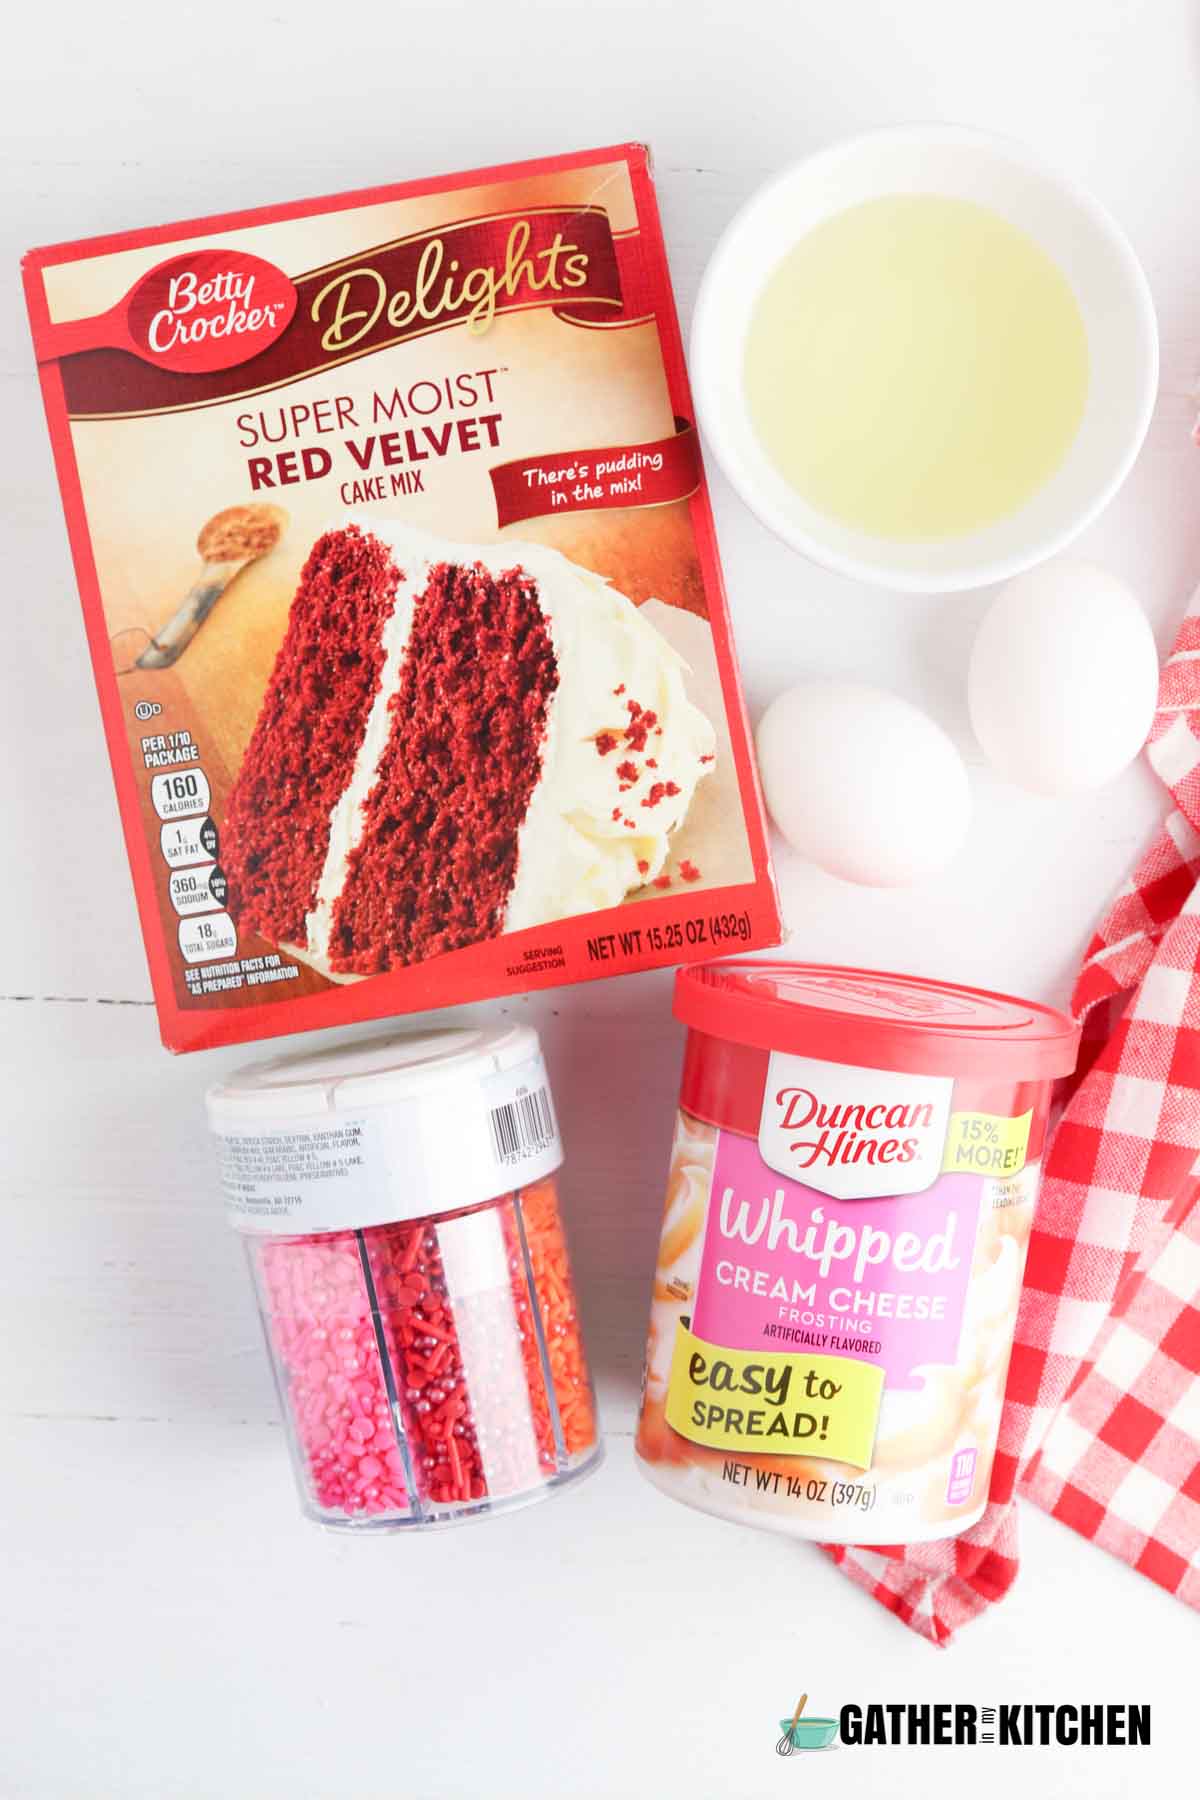 Ingredients for making red velvet cookie bars from cake mix.